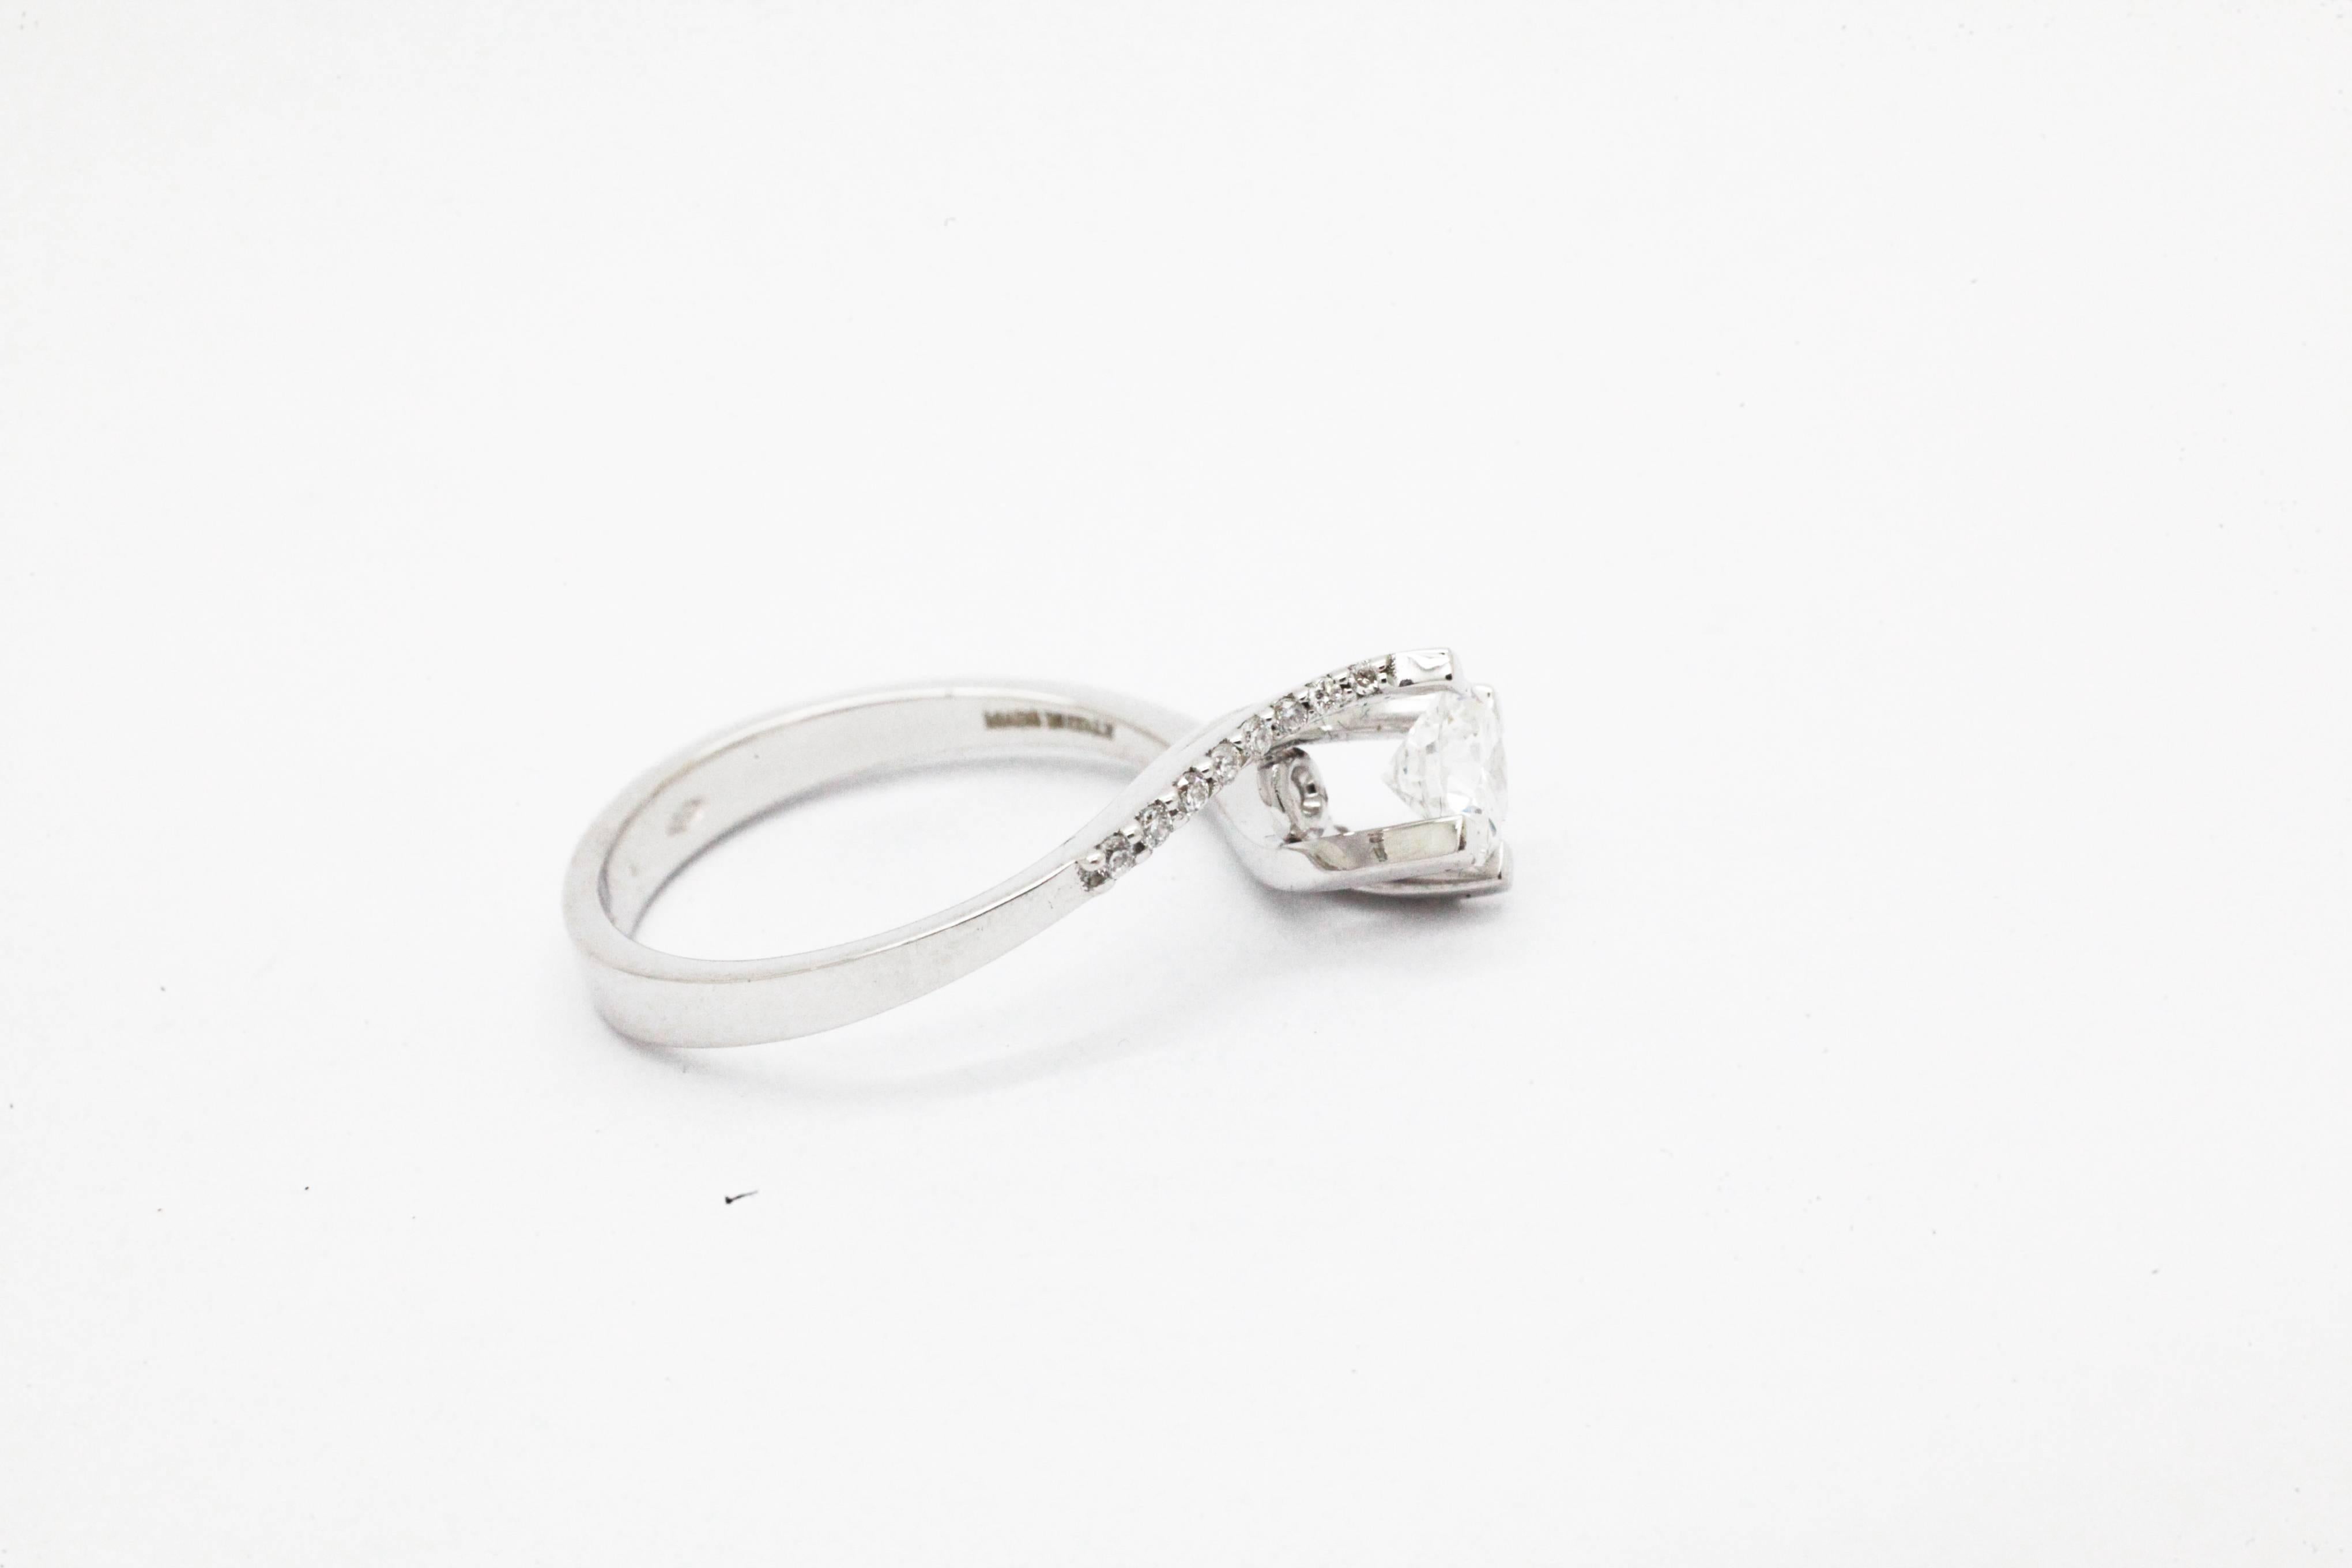 Twisted Diamond Solitaire engagement ring by FERRUCCI with white diamond accents on the flowing shoulders, delicate design and fine craftsmanship, for an everlasting gift, Made in Italy 

Entirely made in 18k white gold
Center Diamond carat weight